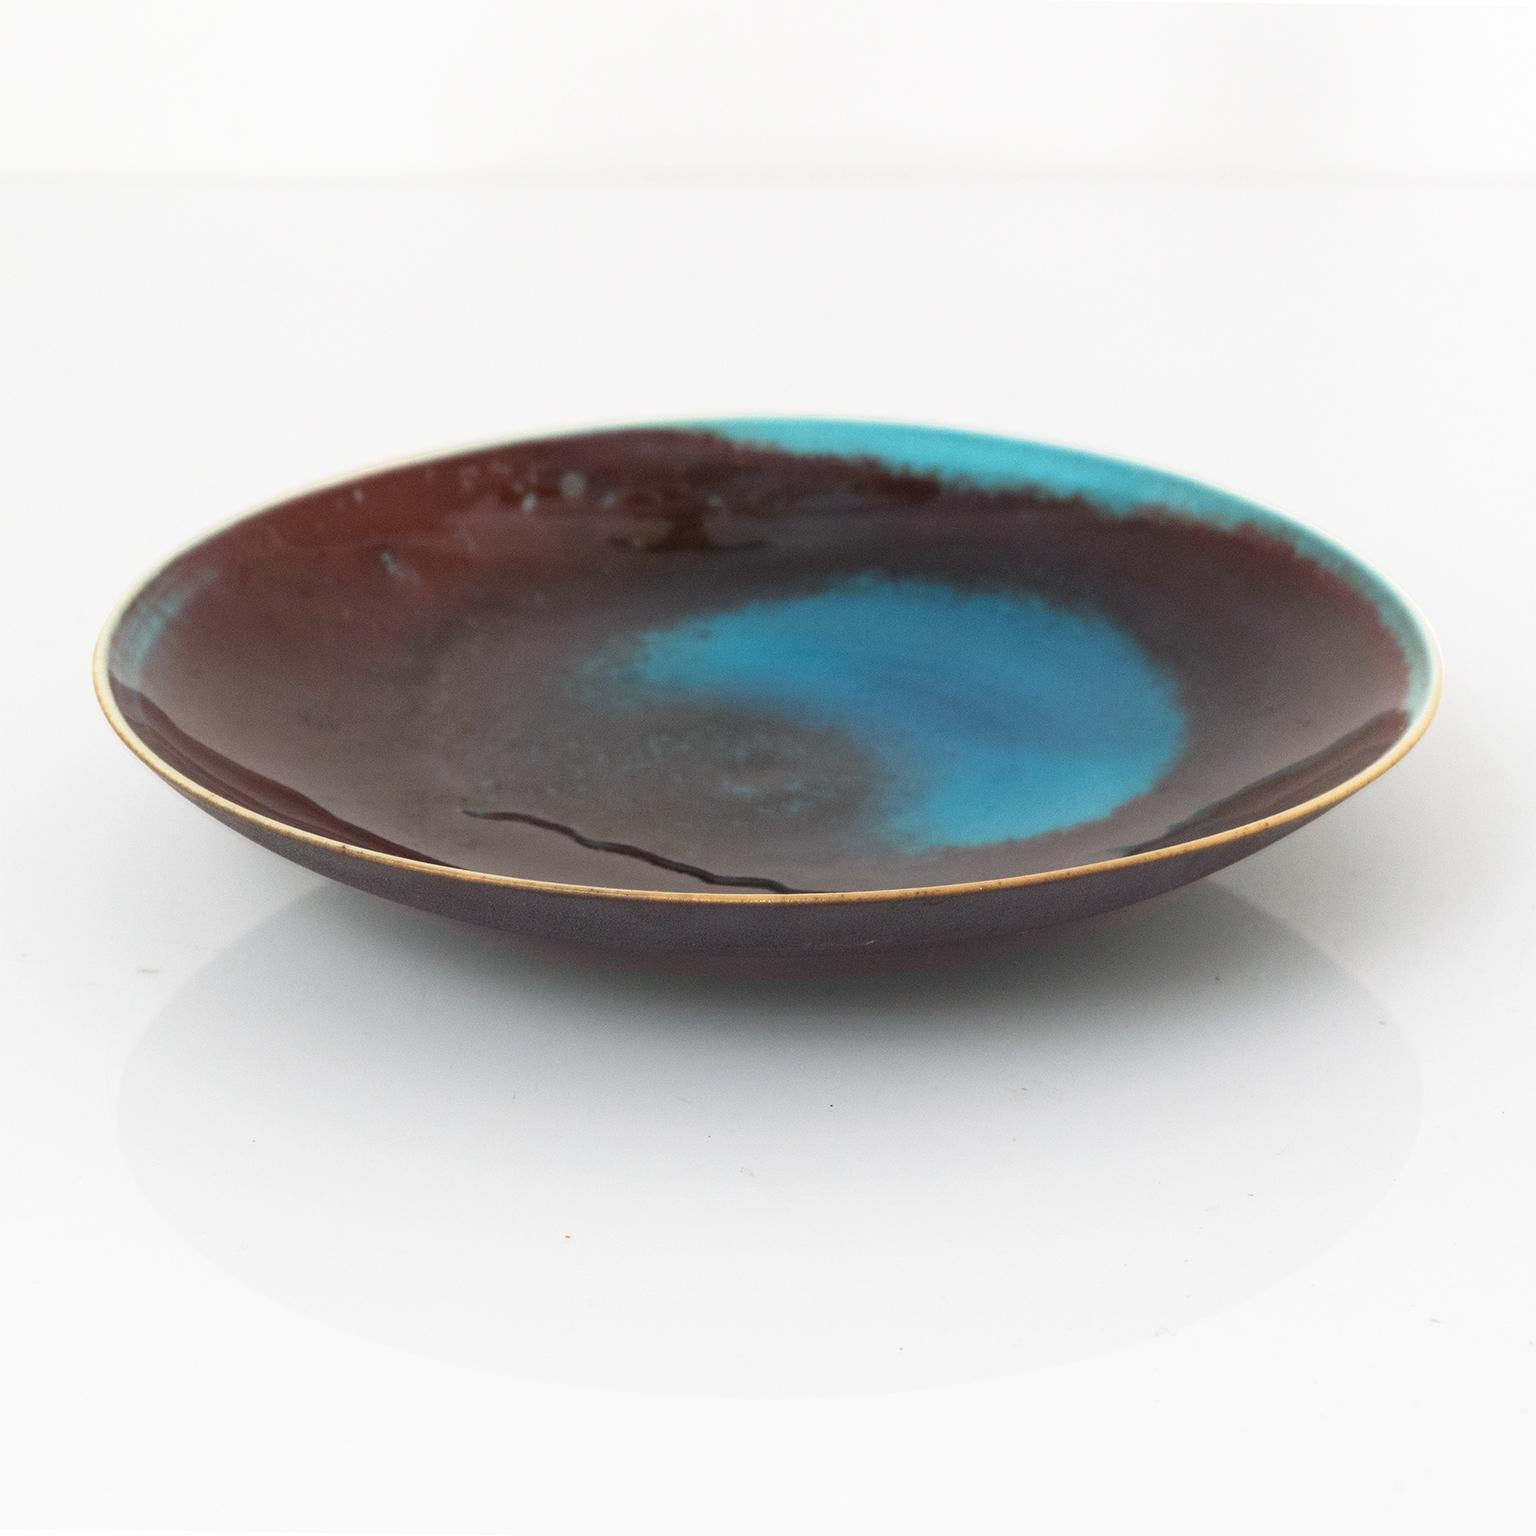 Friedl Holzer-Kjellberg Mid-Century Modern stoneware plate glazed deep red and vibrant blue made for Arabia, Finland. Kjellberg's design style has been characterized as 'modern classicism'; based on tradition, but tempered by clean simplicity. She